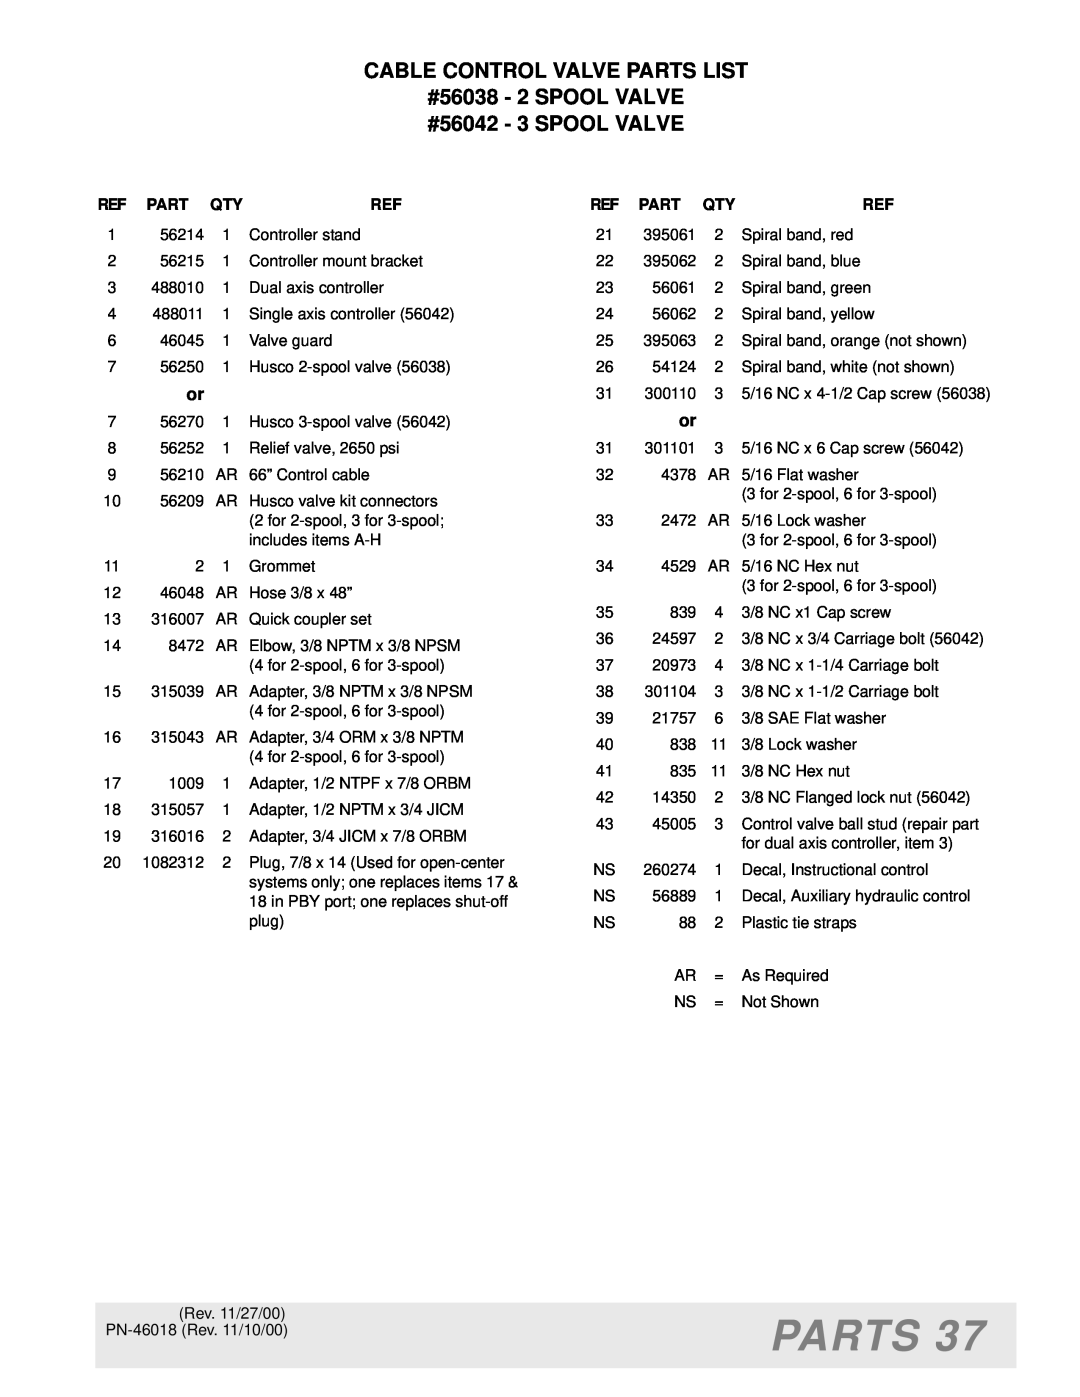 Woods Equipment M8200 manual Parts, CABLE CONTROL VALVE PARTS LIST #56038 - 2 SPOOL VALVE, #56042 - 3 SPOOL VALVE 